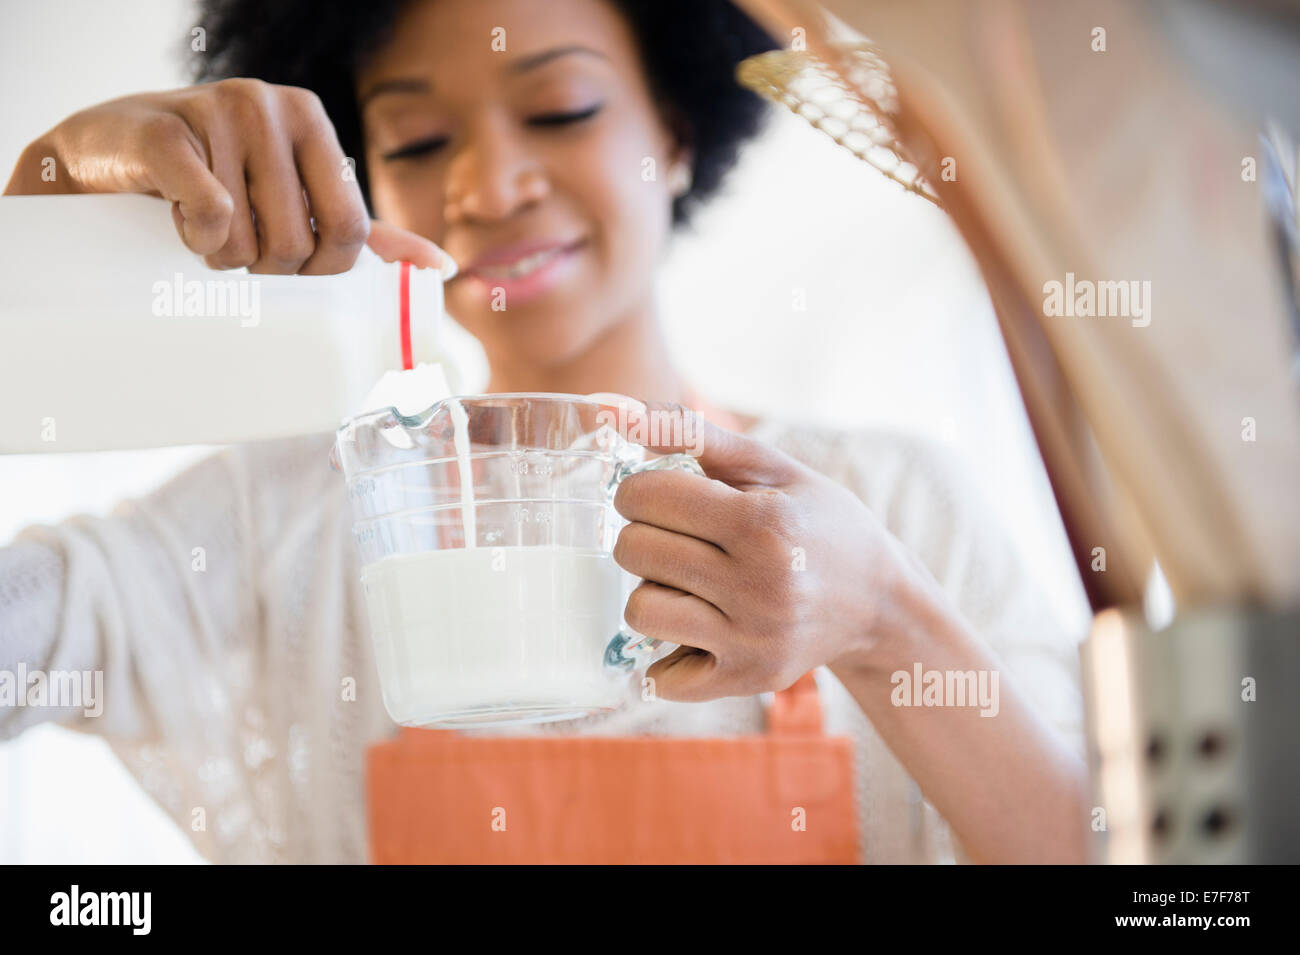 African American woman cooking in kitchen Stock Photo